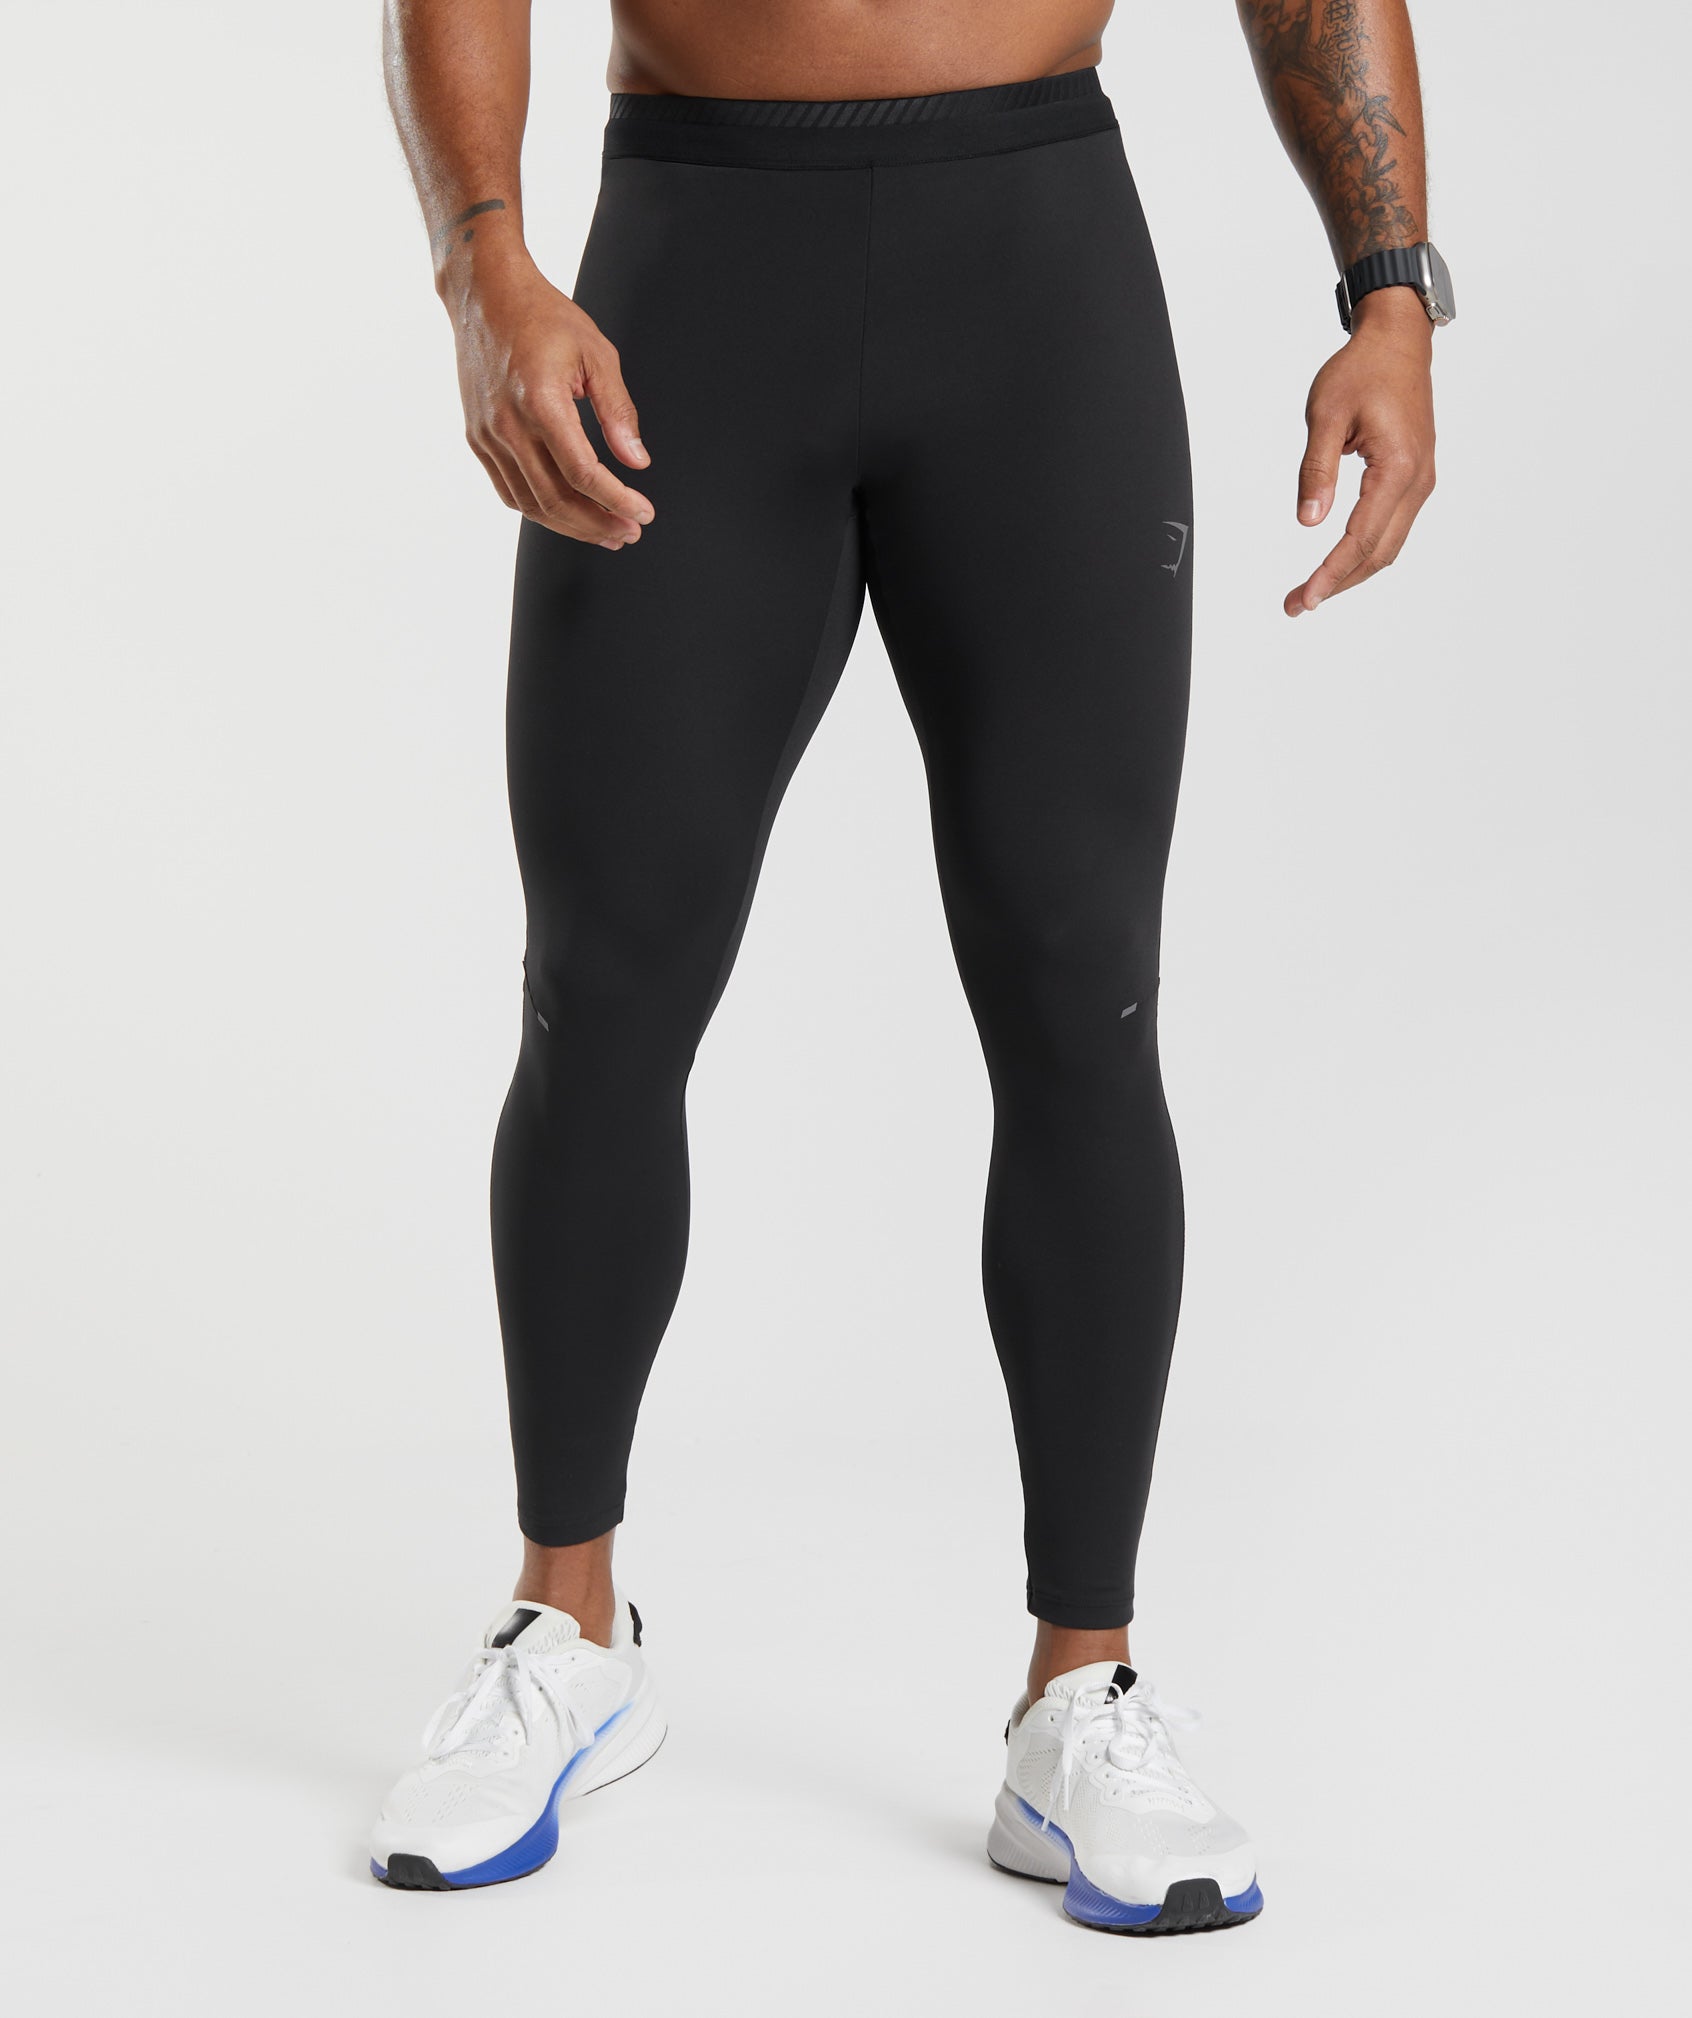 Under Armour Cold Gear Mens Compression Leggings (Black-Charcoal), Mens  Tights, All Mens Clothing, Mens Clothing